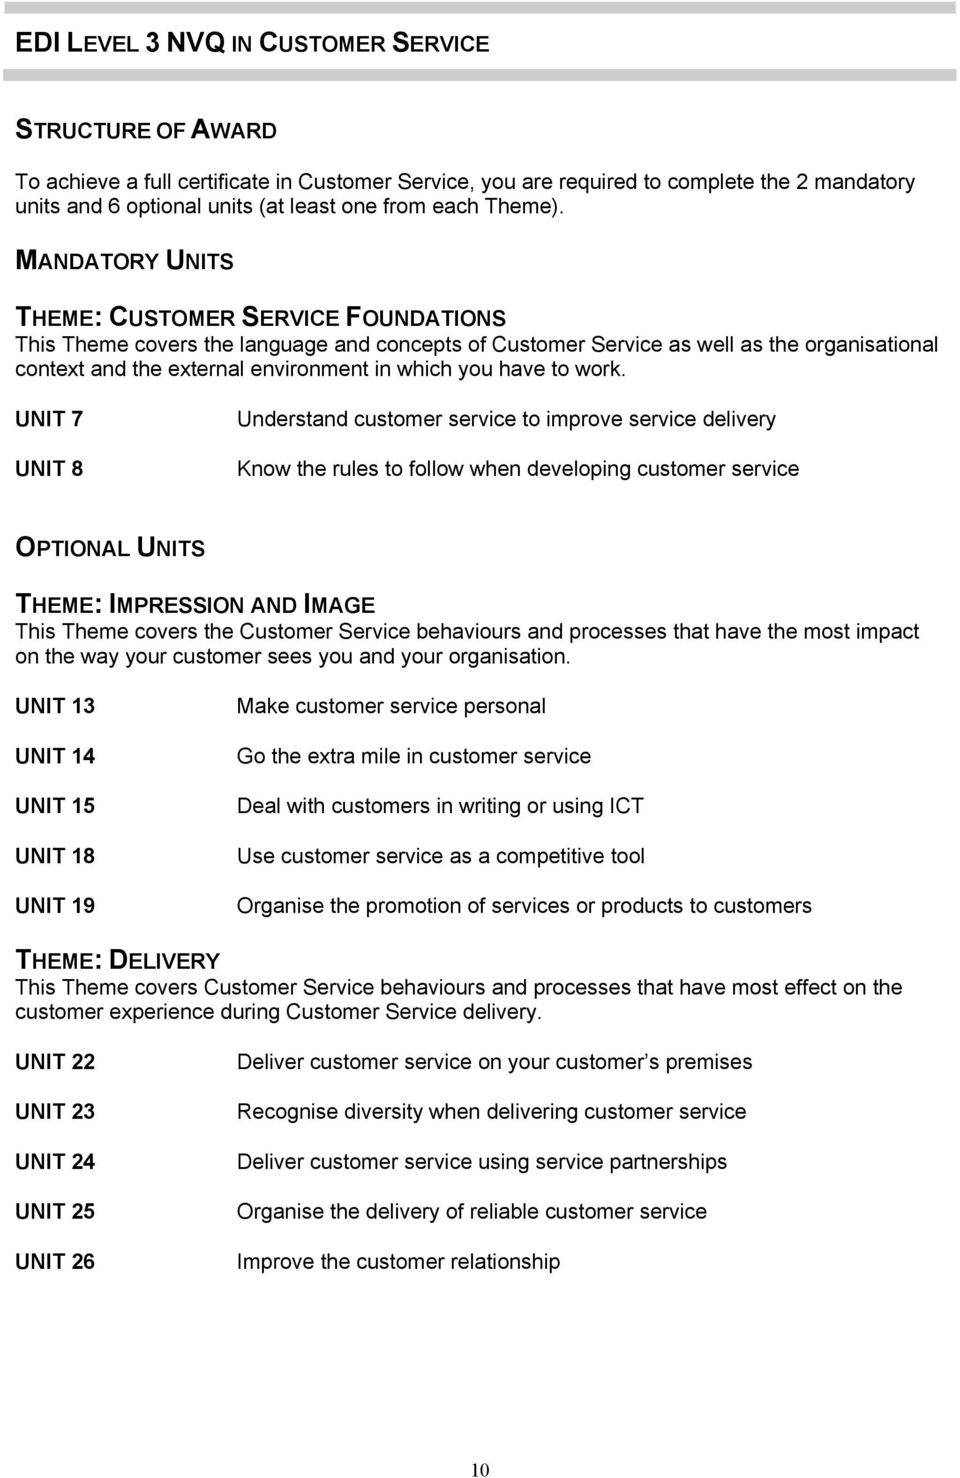 MANDATORY UNITS THEME: CUSTOMER SERVICE FOUNDATIONS This Theme covers the language and concepts of Customer Service as well as the organisational context and the external environment in which you